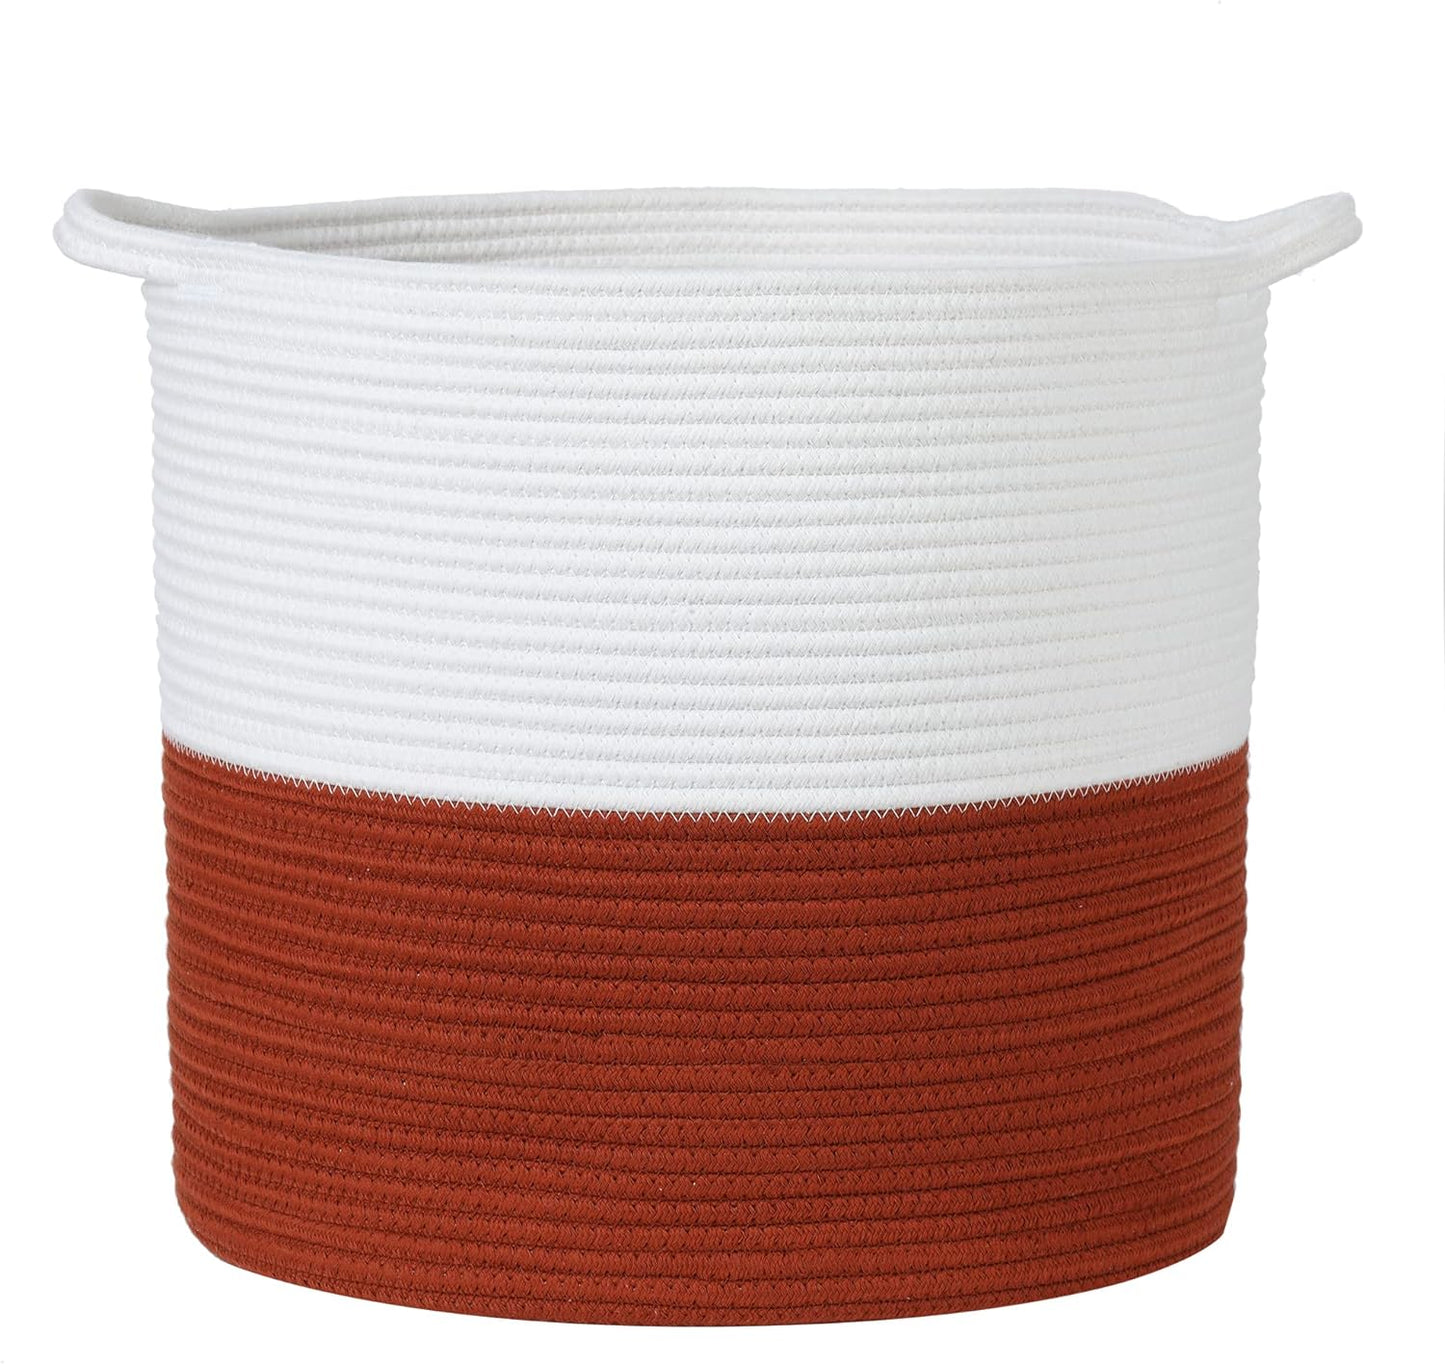 Midlee Rust & White Rope Toys Basket